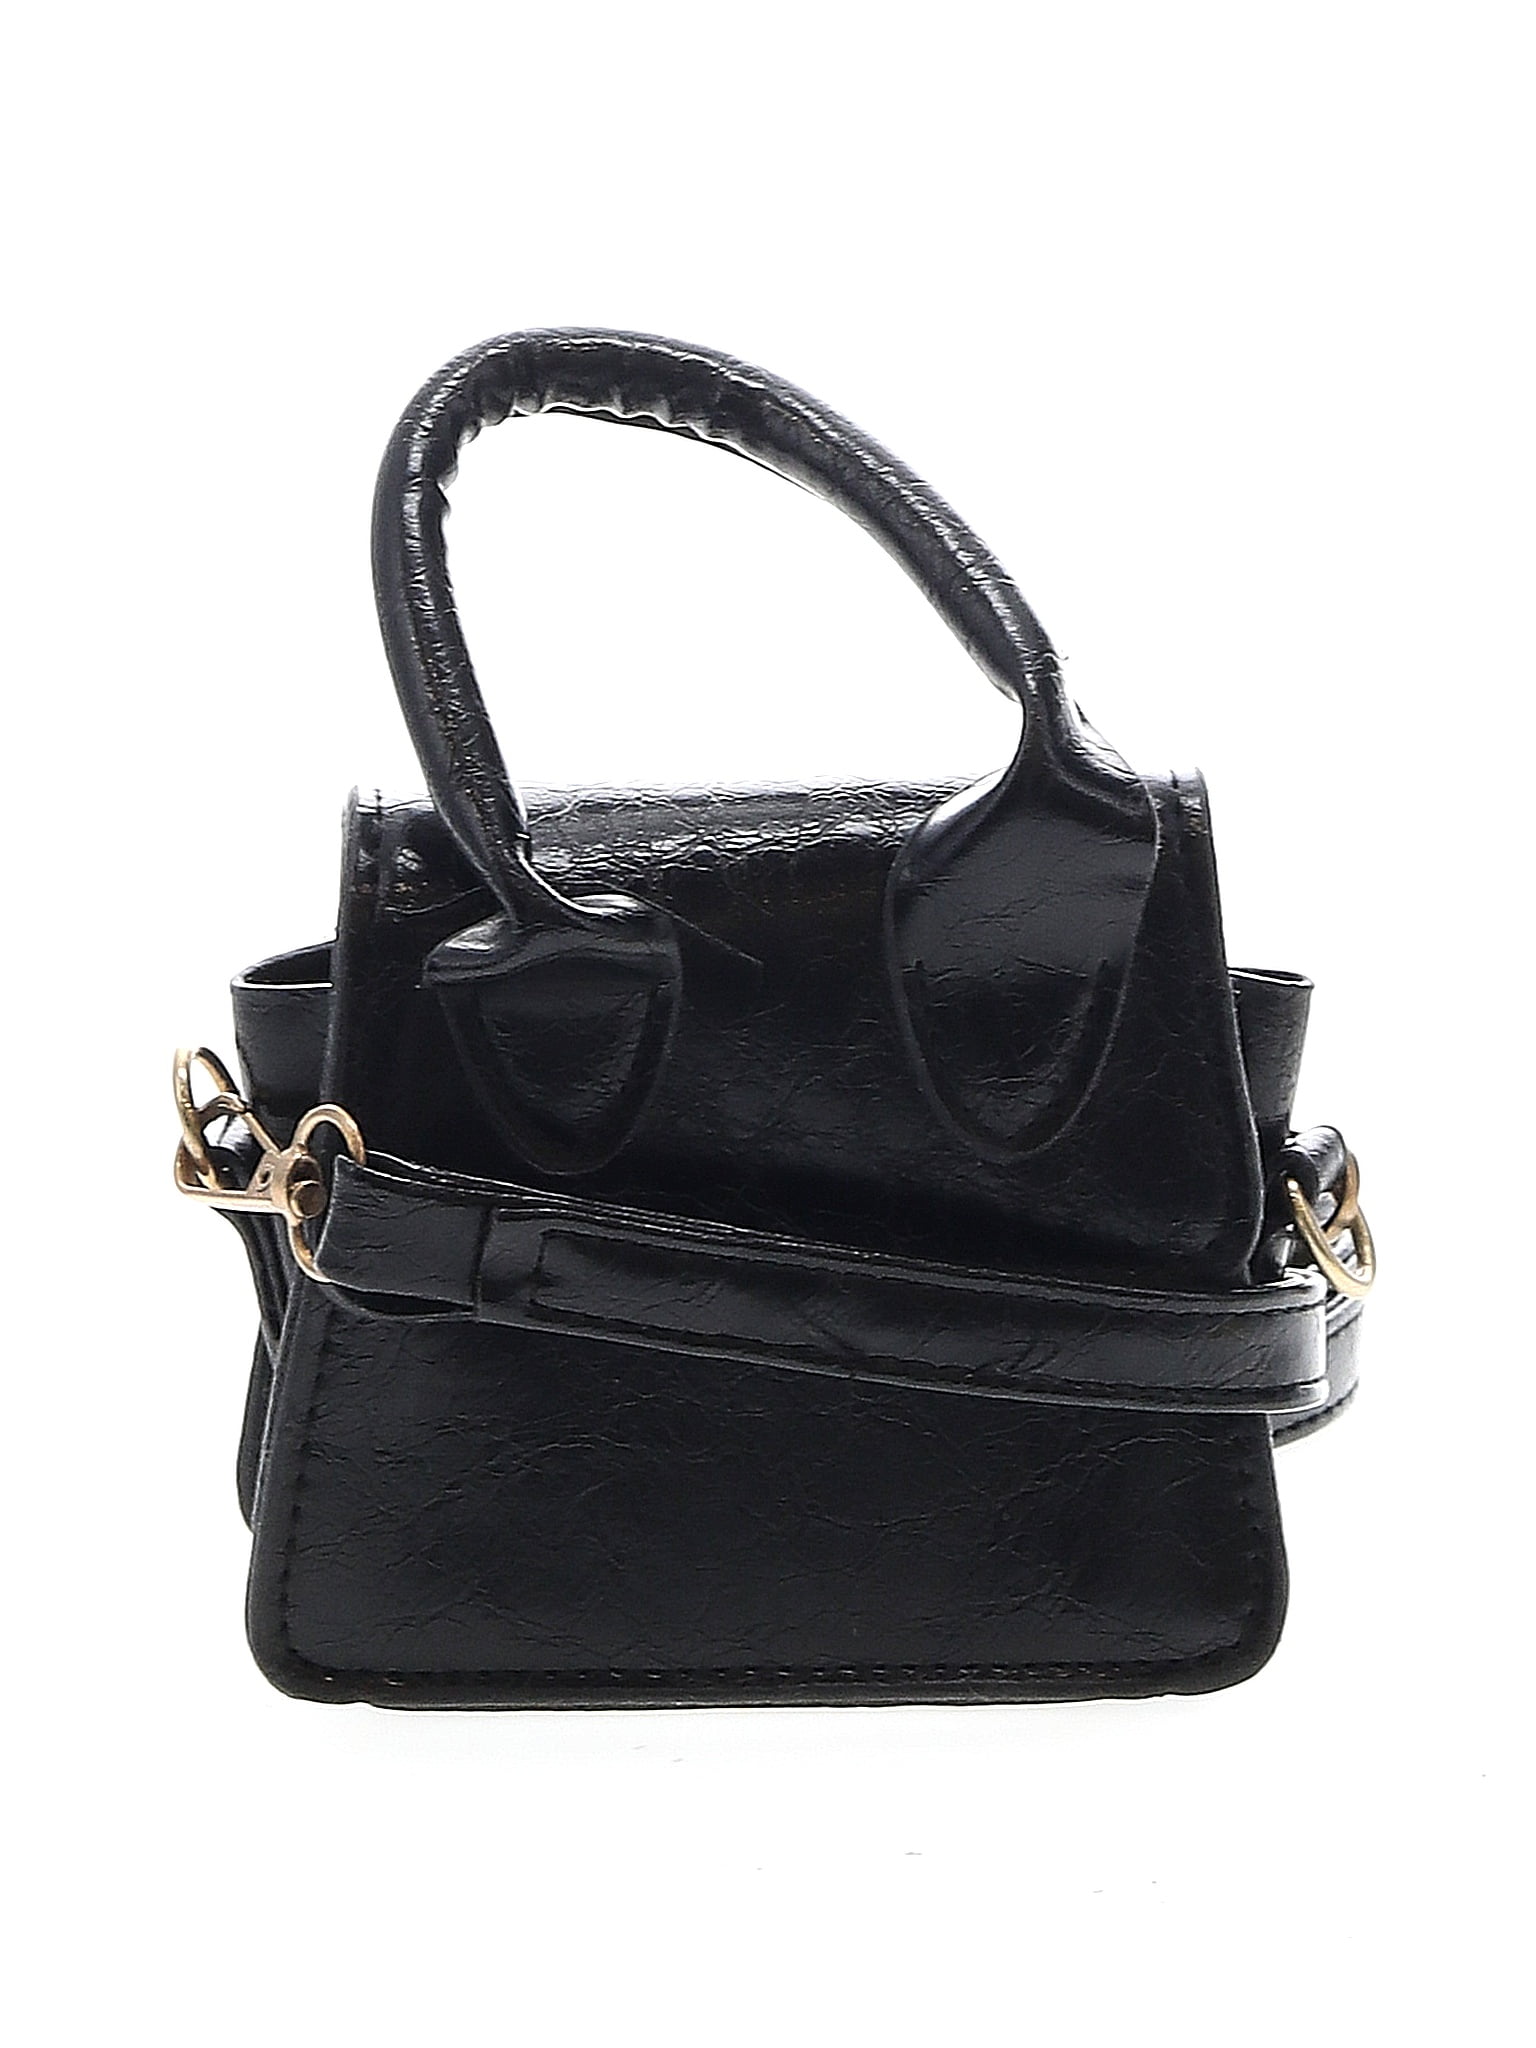 Shein Handbags On Sale Up To 90% Off Retail